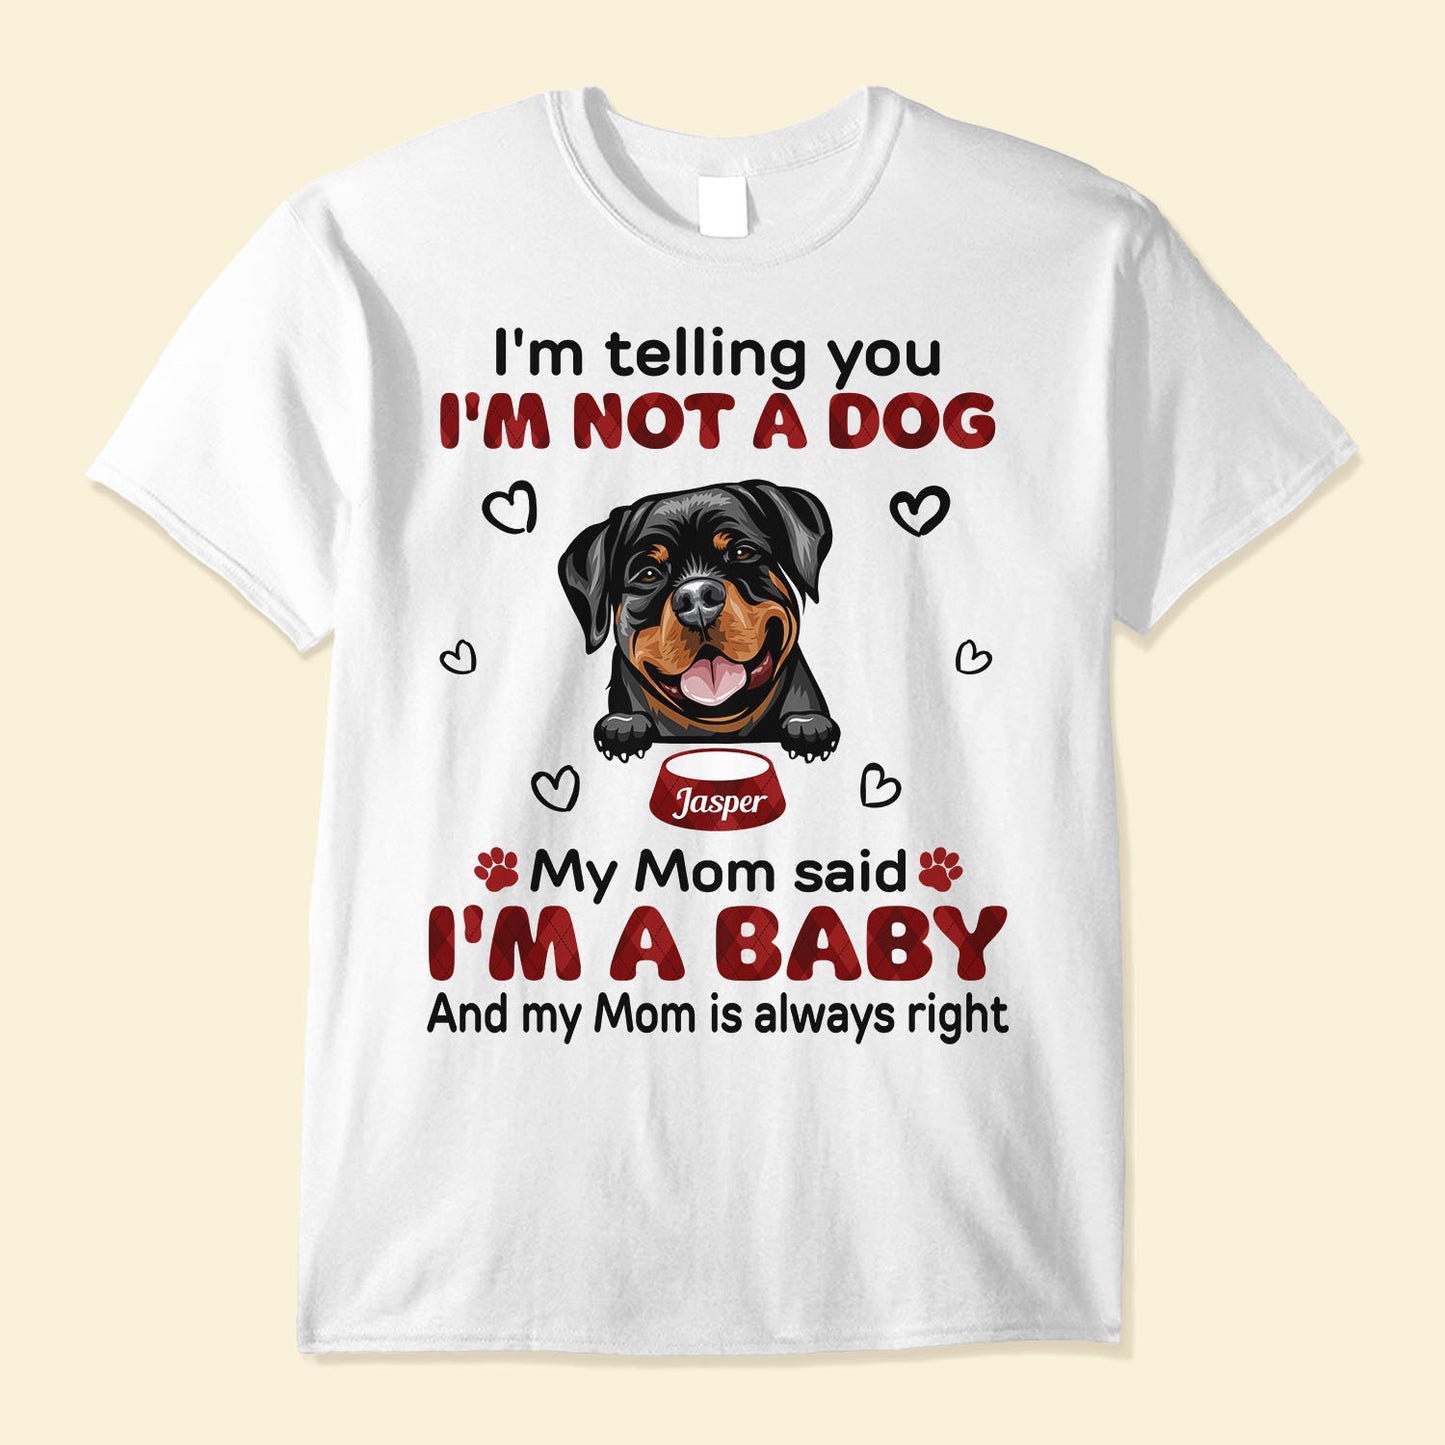 My Mom Said I'm A Baby - Personalized Shirt